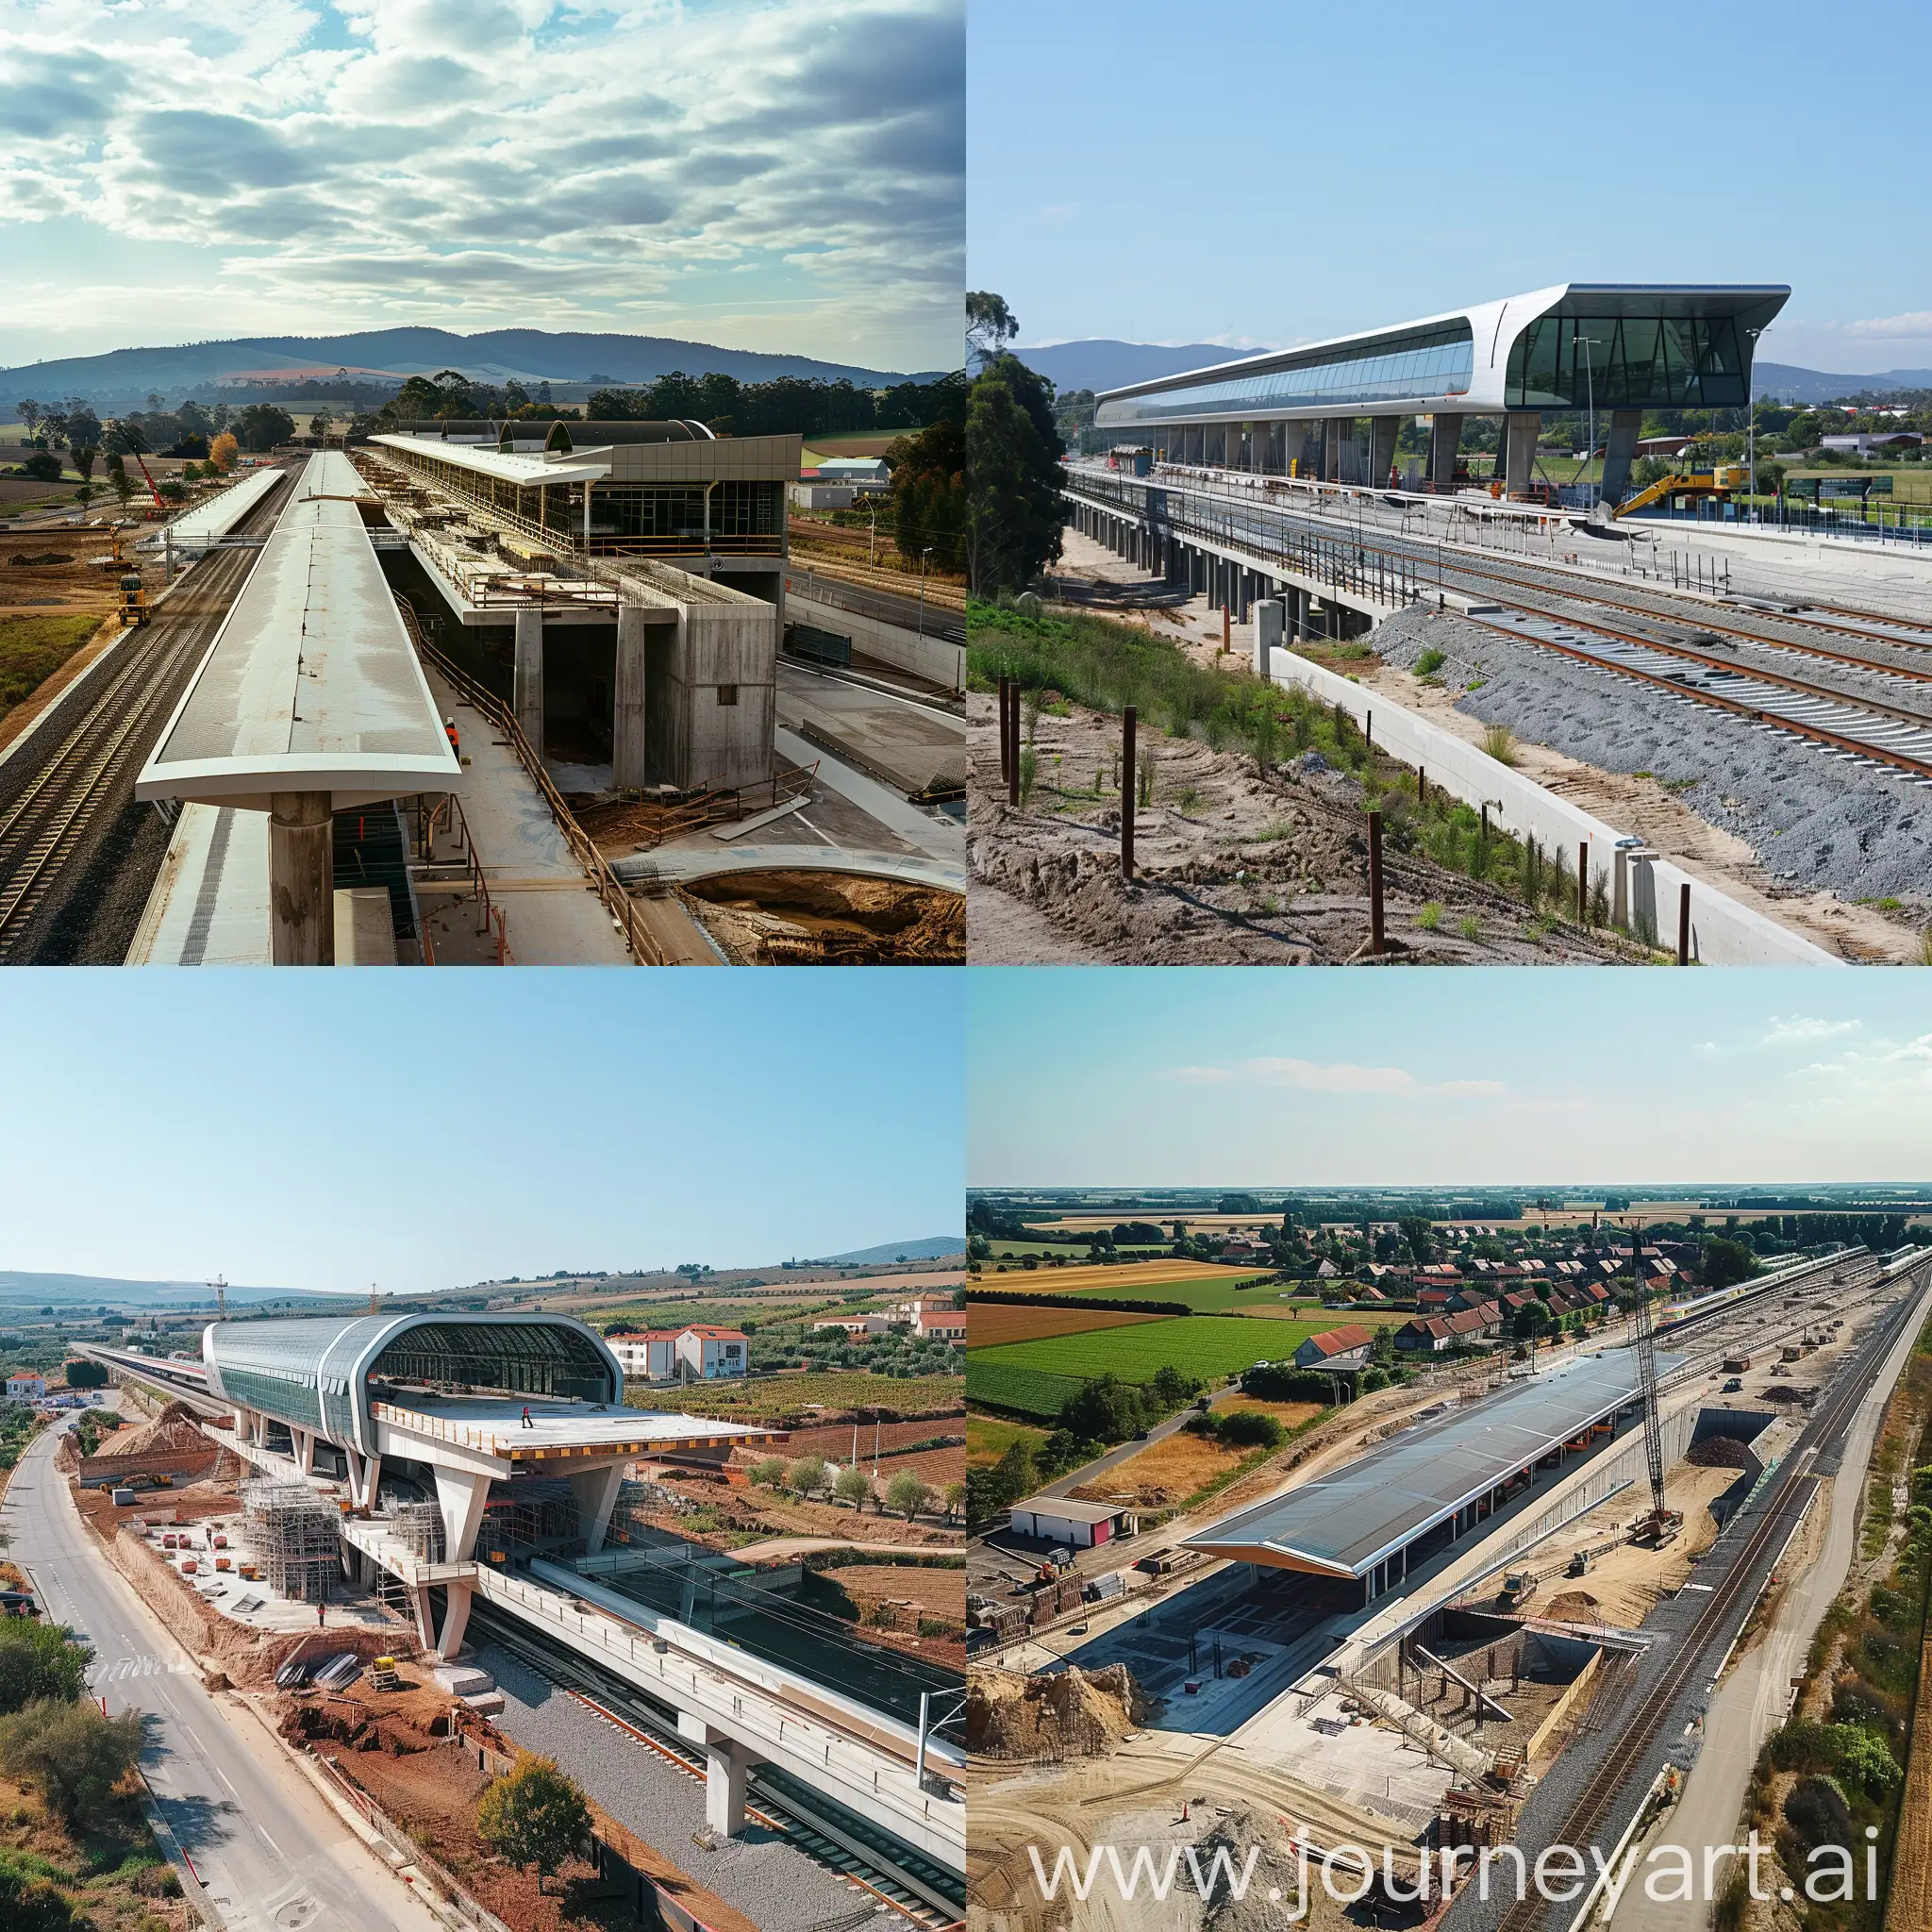 A modern high-speed train station under construction in a country town + project photo